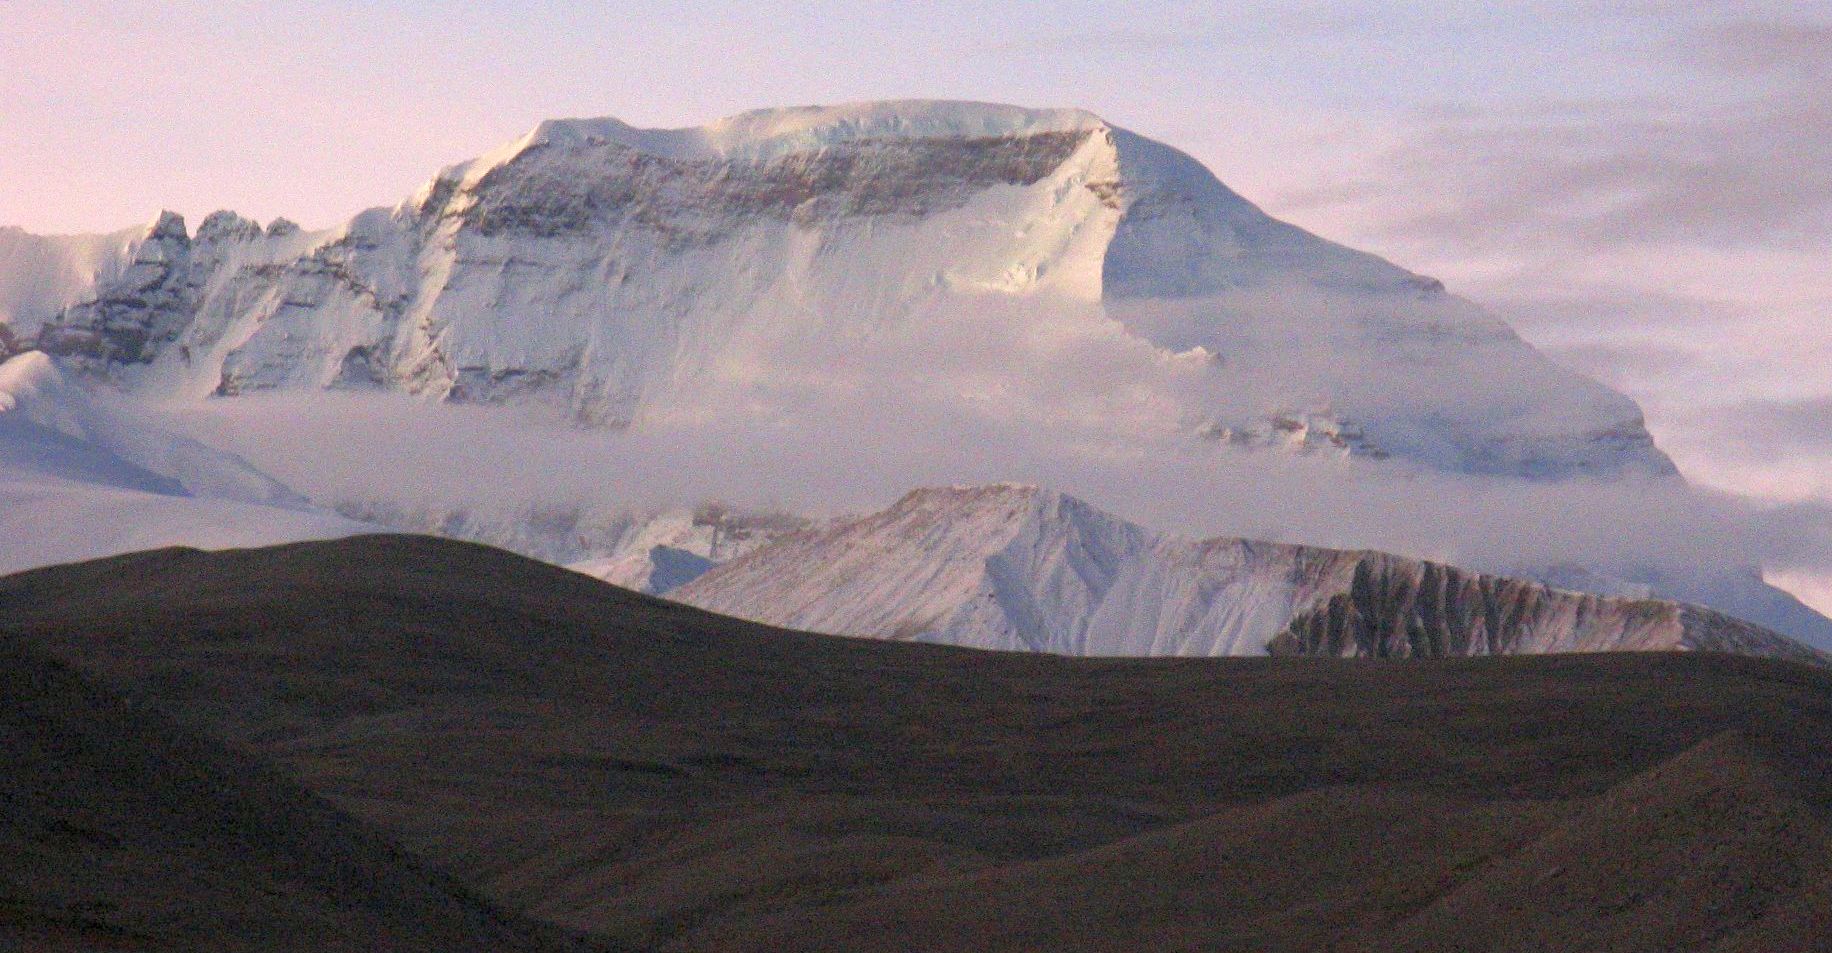 Cho Oyu from the North